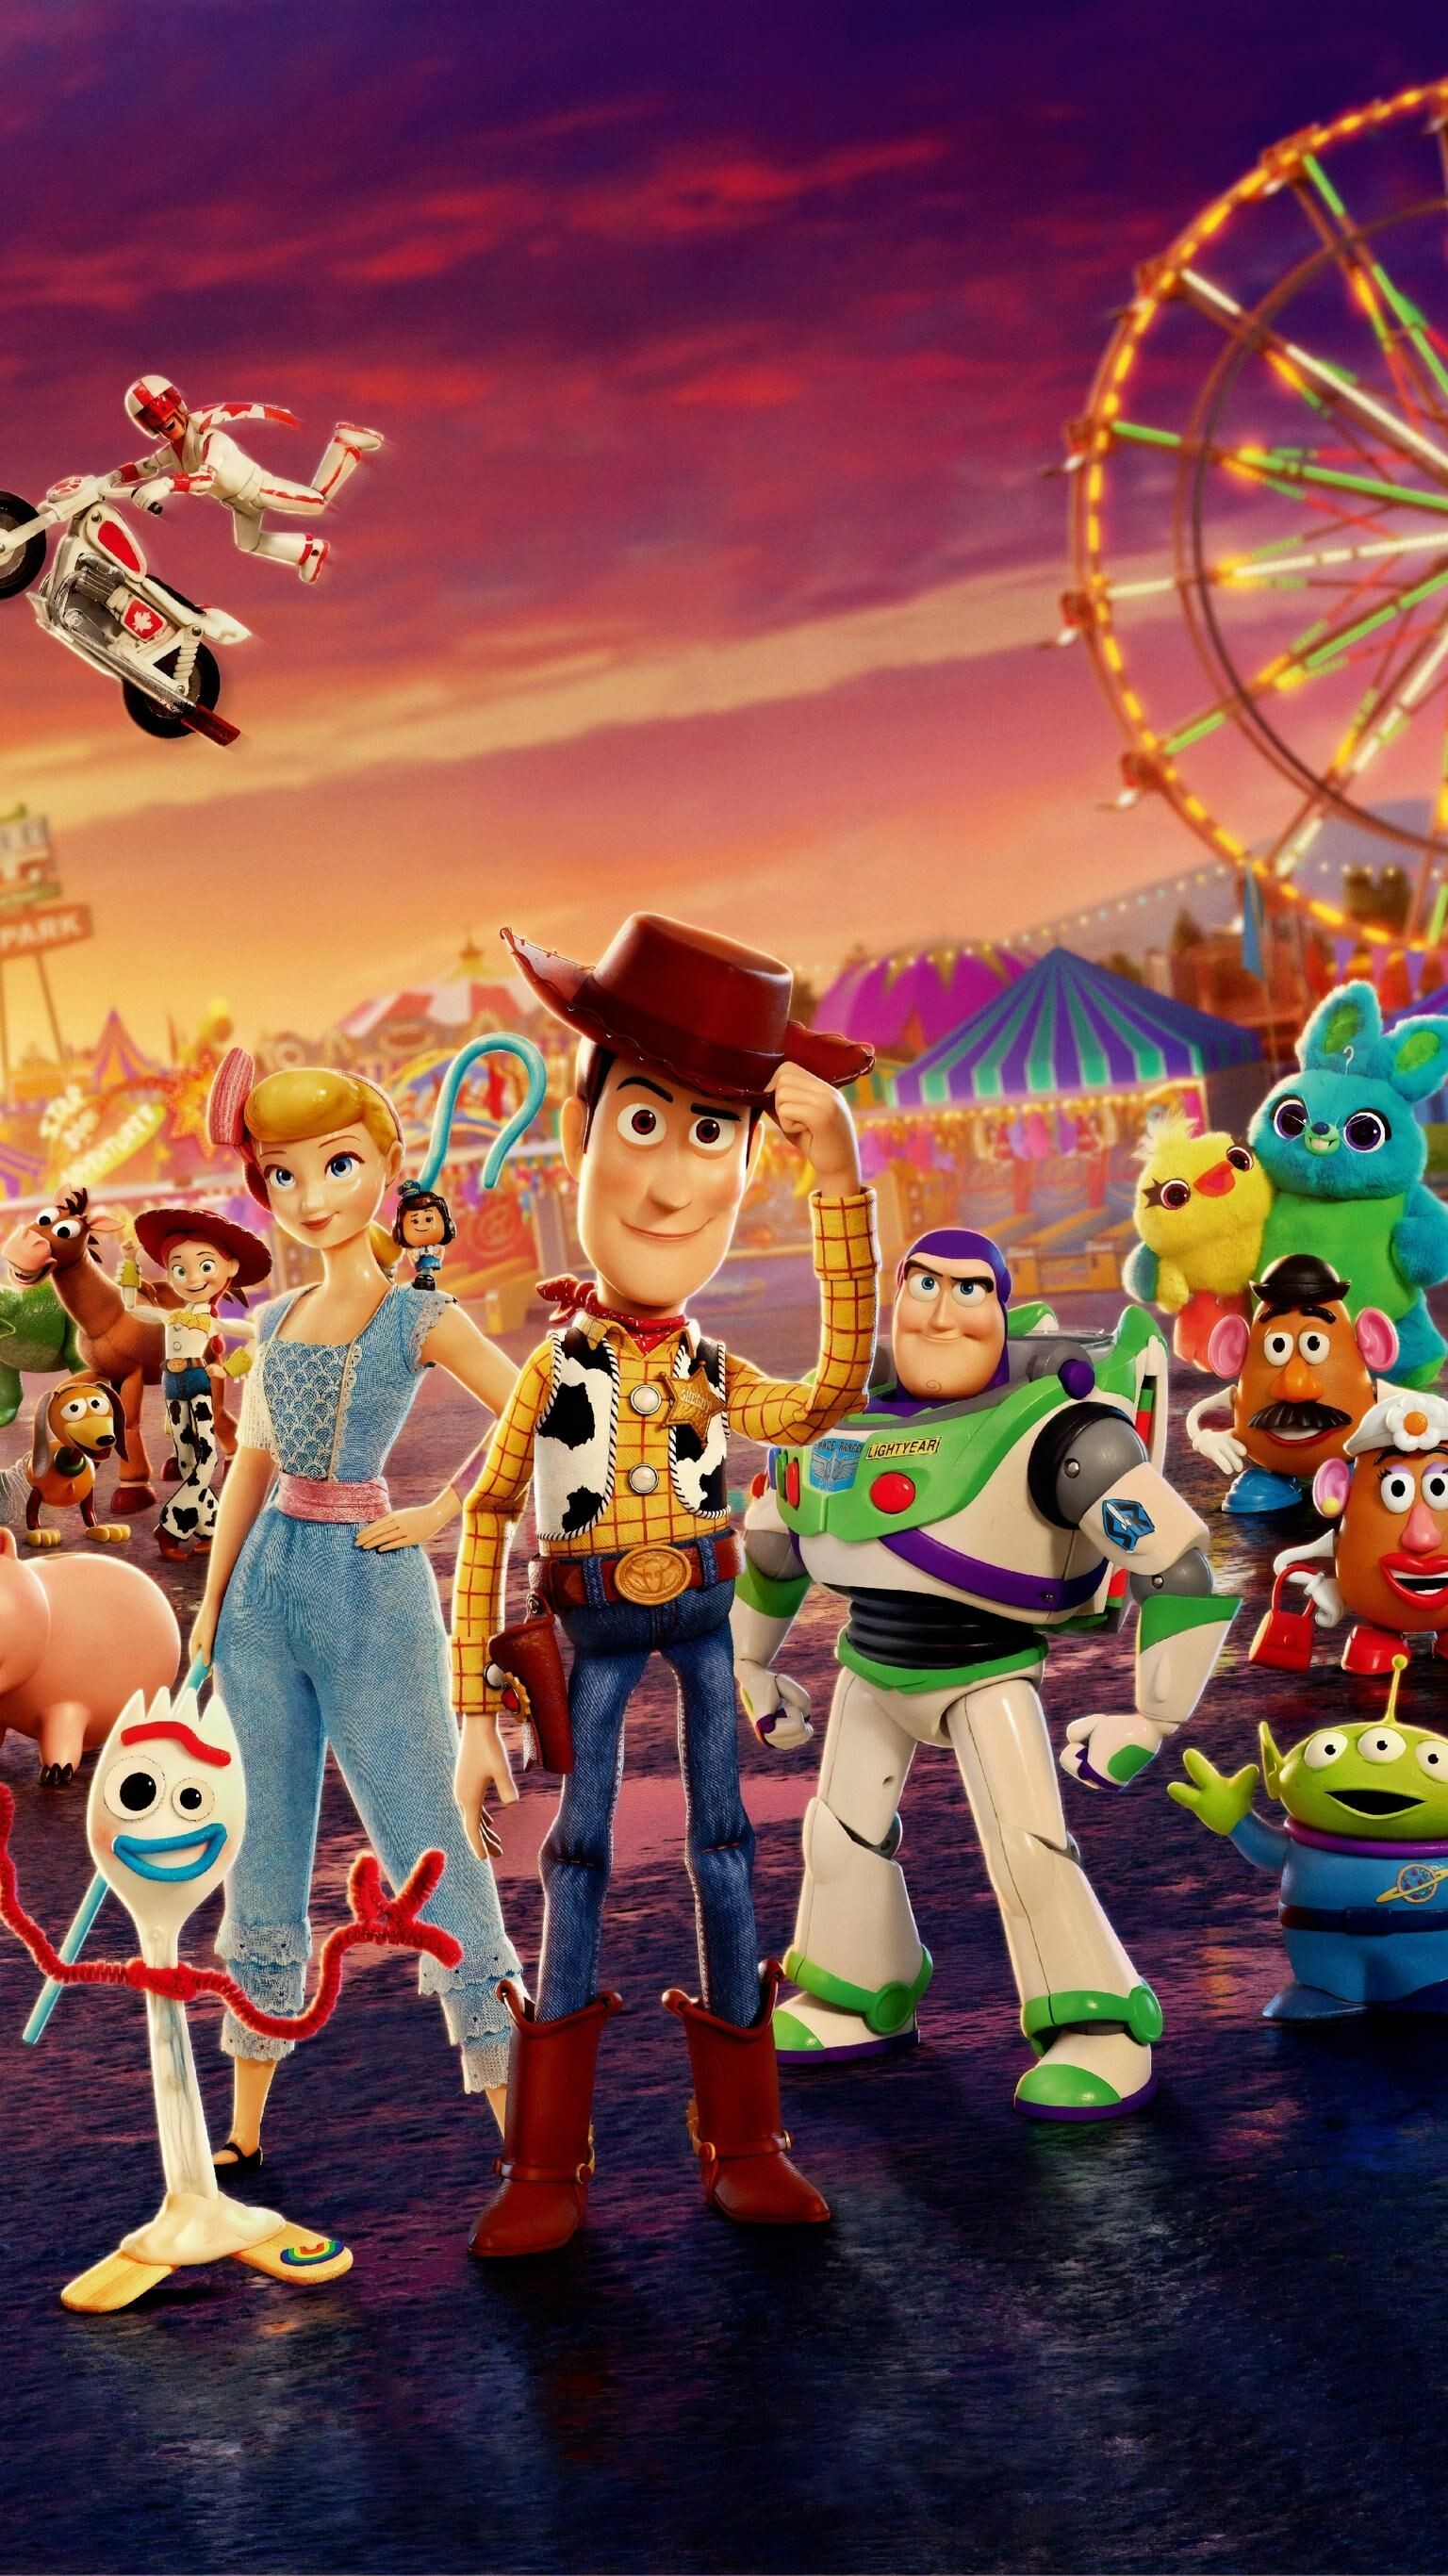 Toy Story: Disney, The eighth-highest-grossing film of 2019, Pixar. 1540x2740 HD Wallpaper.